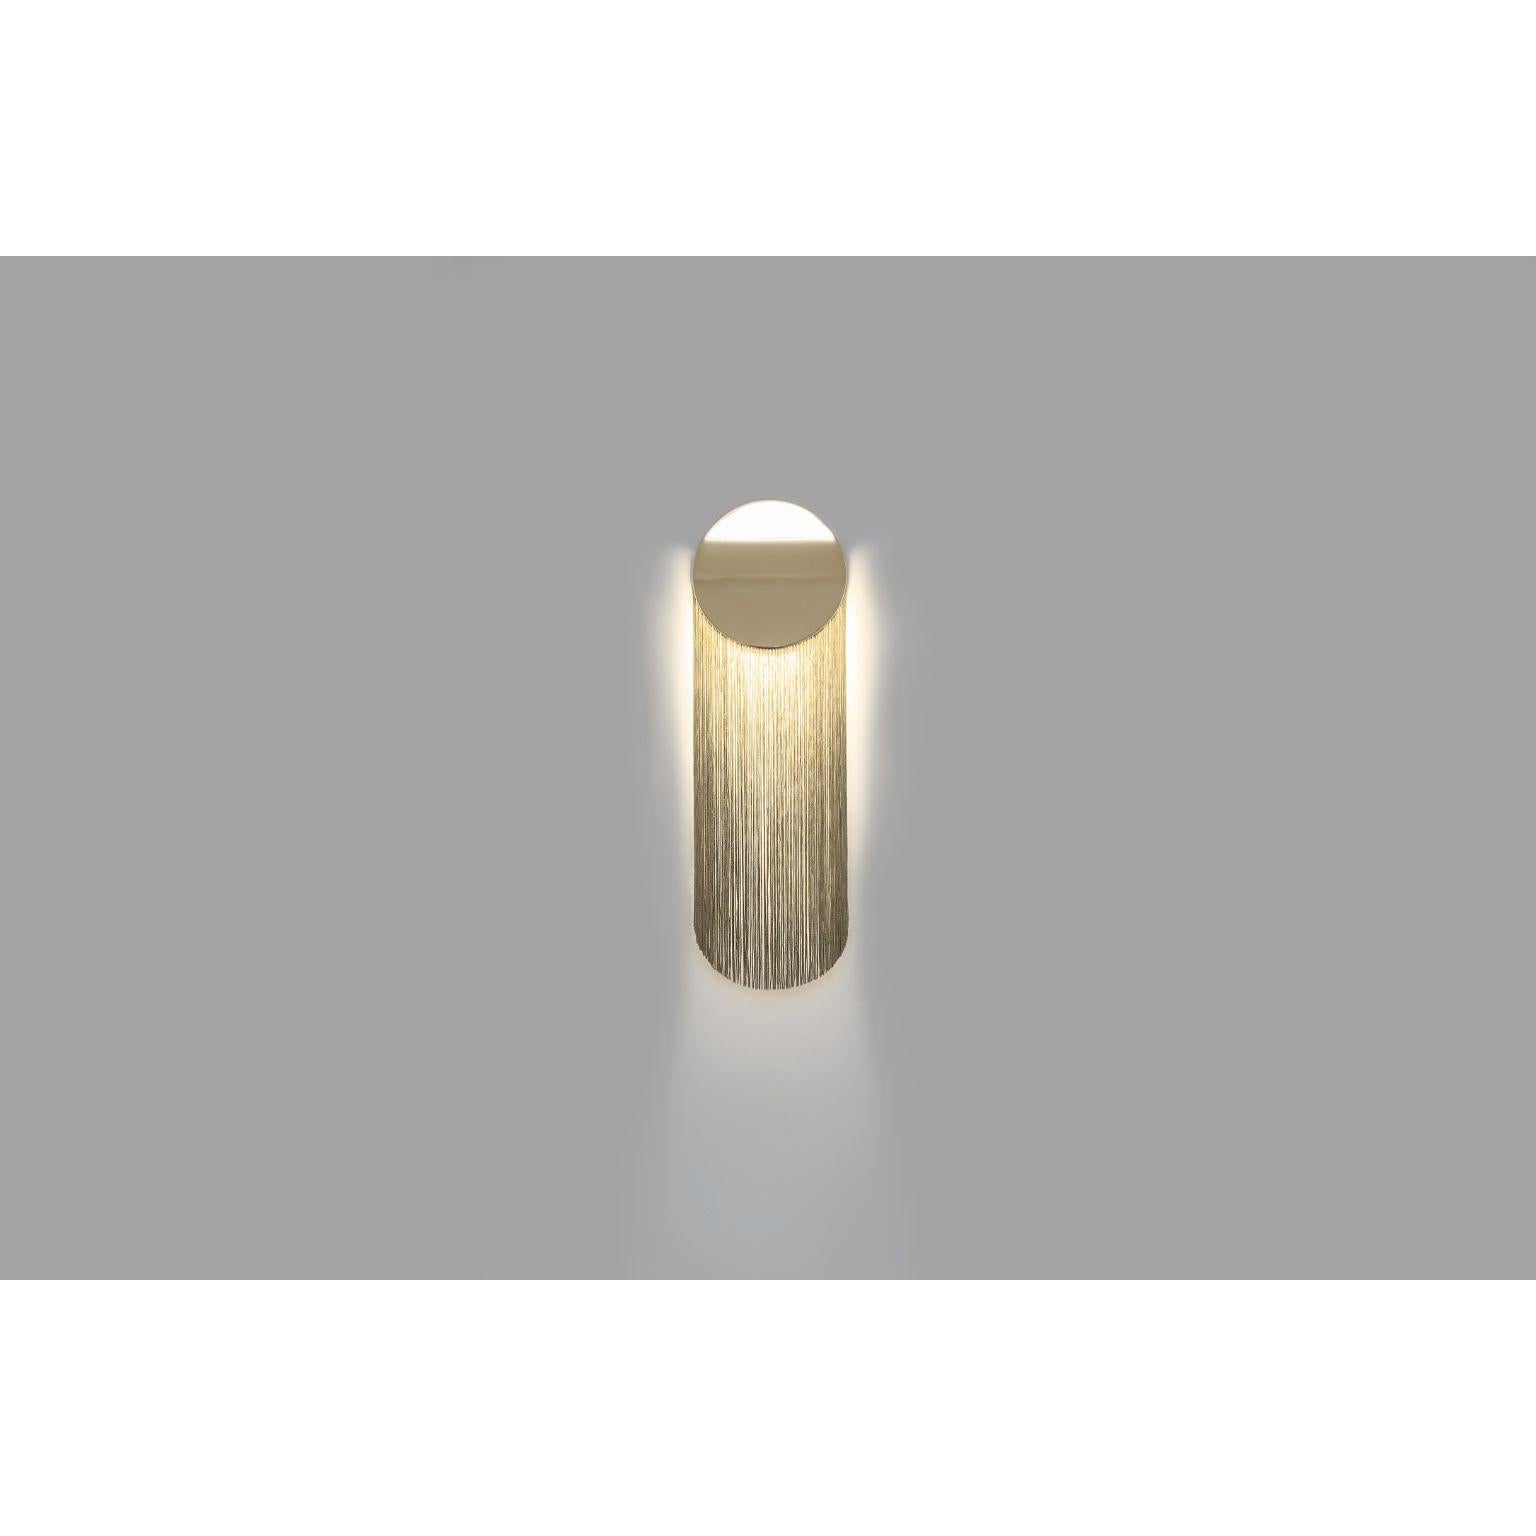 Cé Petite wall lamp short by Studio d'Armes
Design by Alexandre Joncas
Dimensions: 9.9 x 16.5 x H 50.8 cm
Materials: 12k Gold Plated Steel, Rayon fringes offered in different colors
Design by Alexandre Joncas
Cé Petite, with abridged